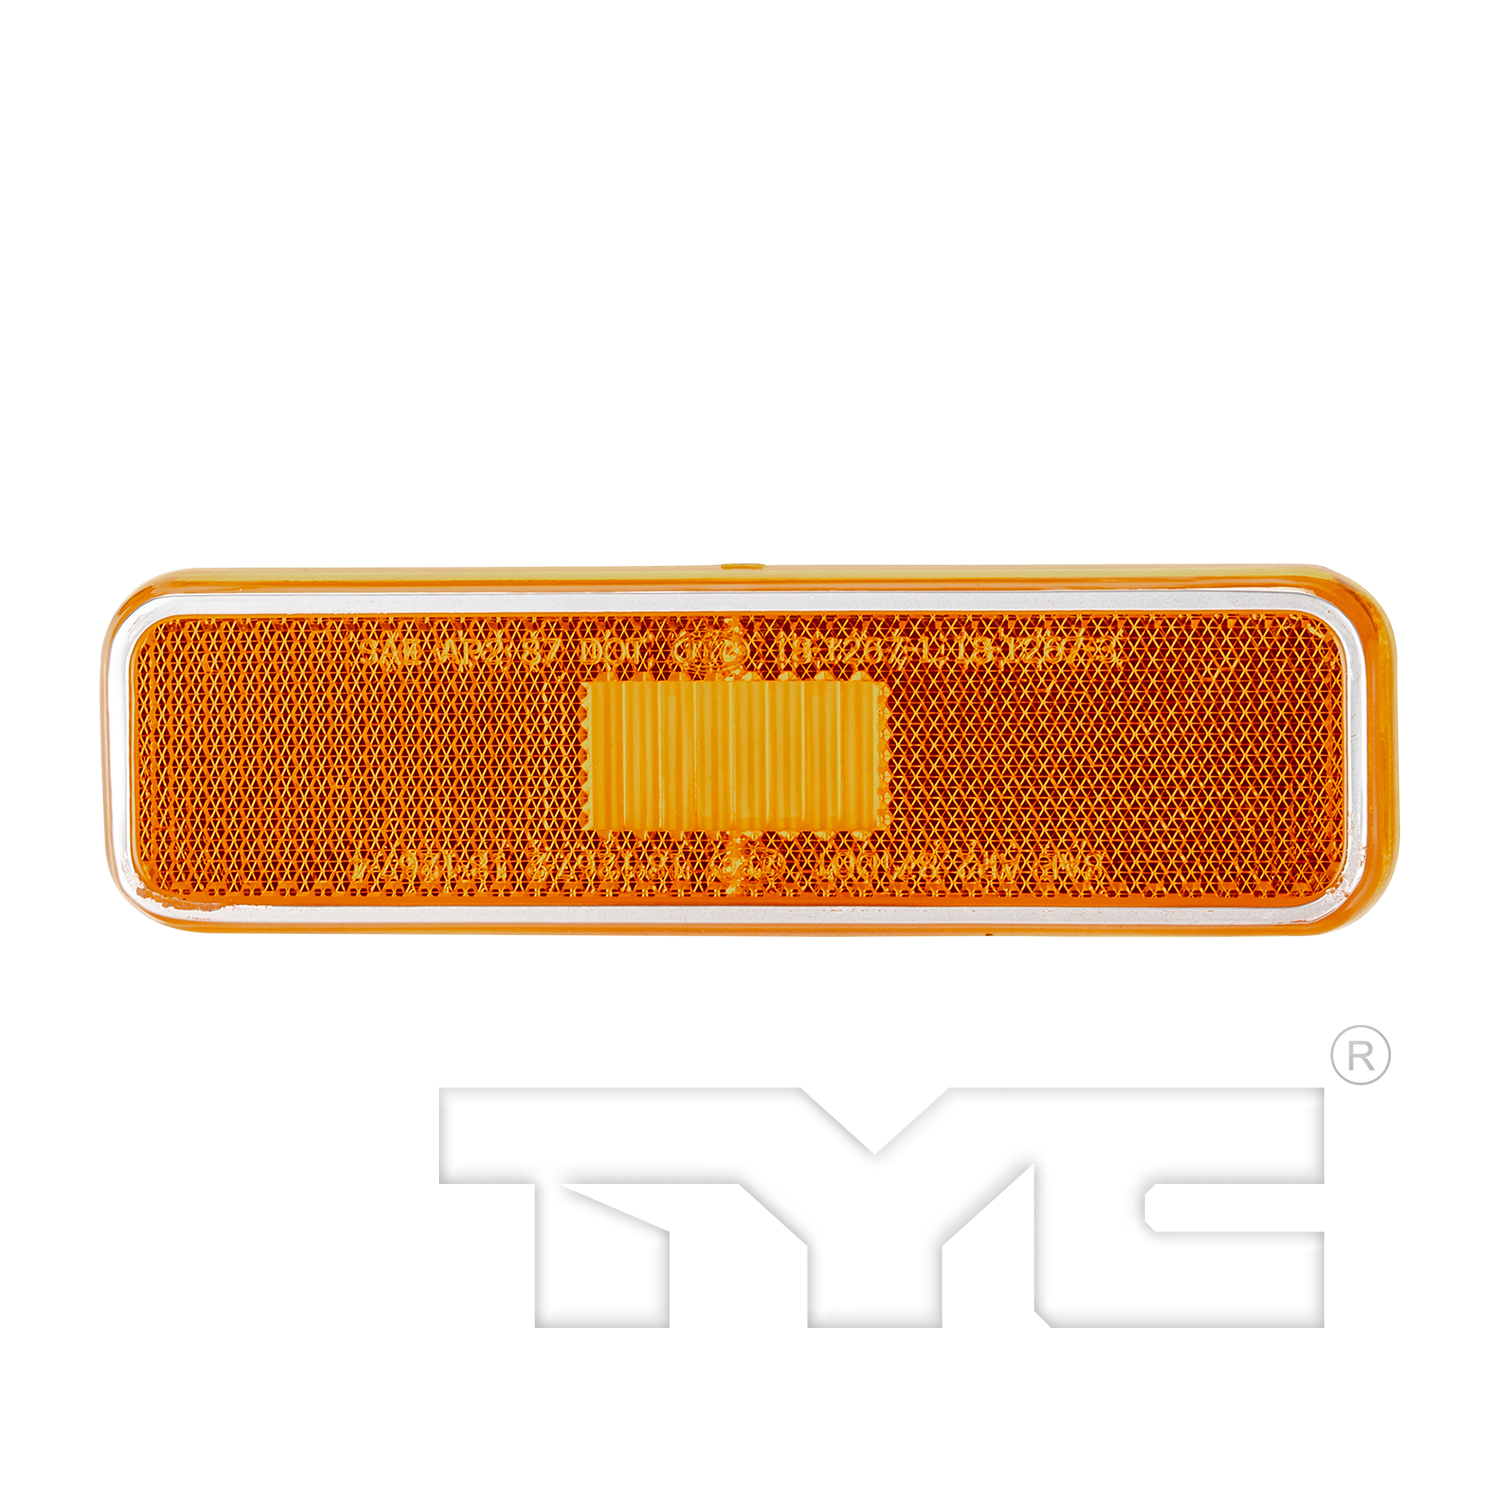 Aftermarket LAMPS for DODGE - W350, W350,81-93,LT Front marker lamp assy